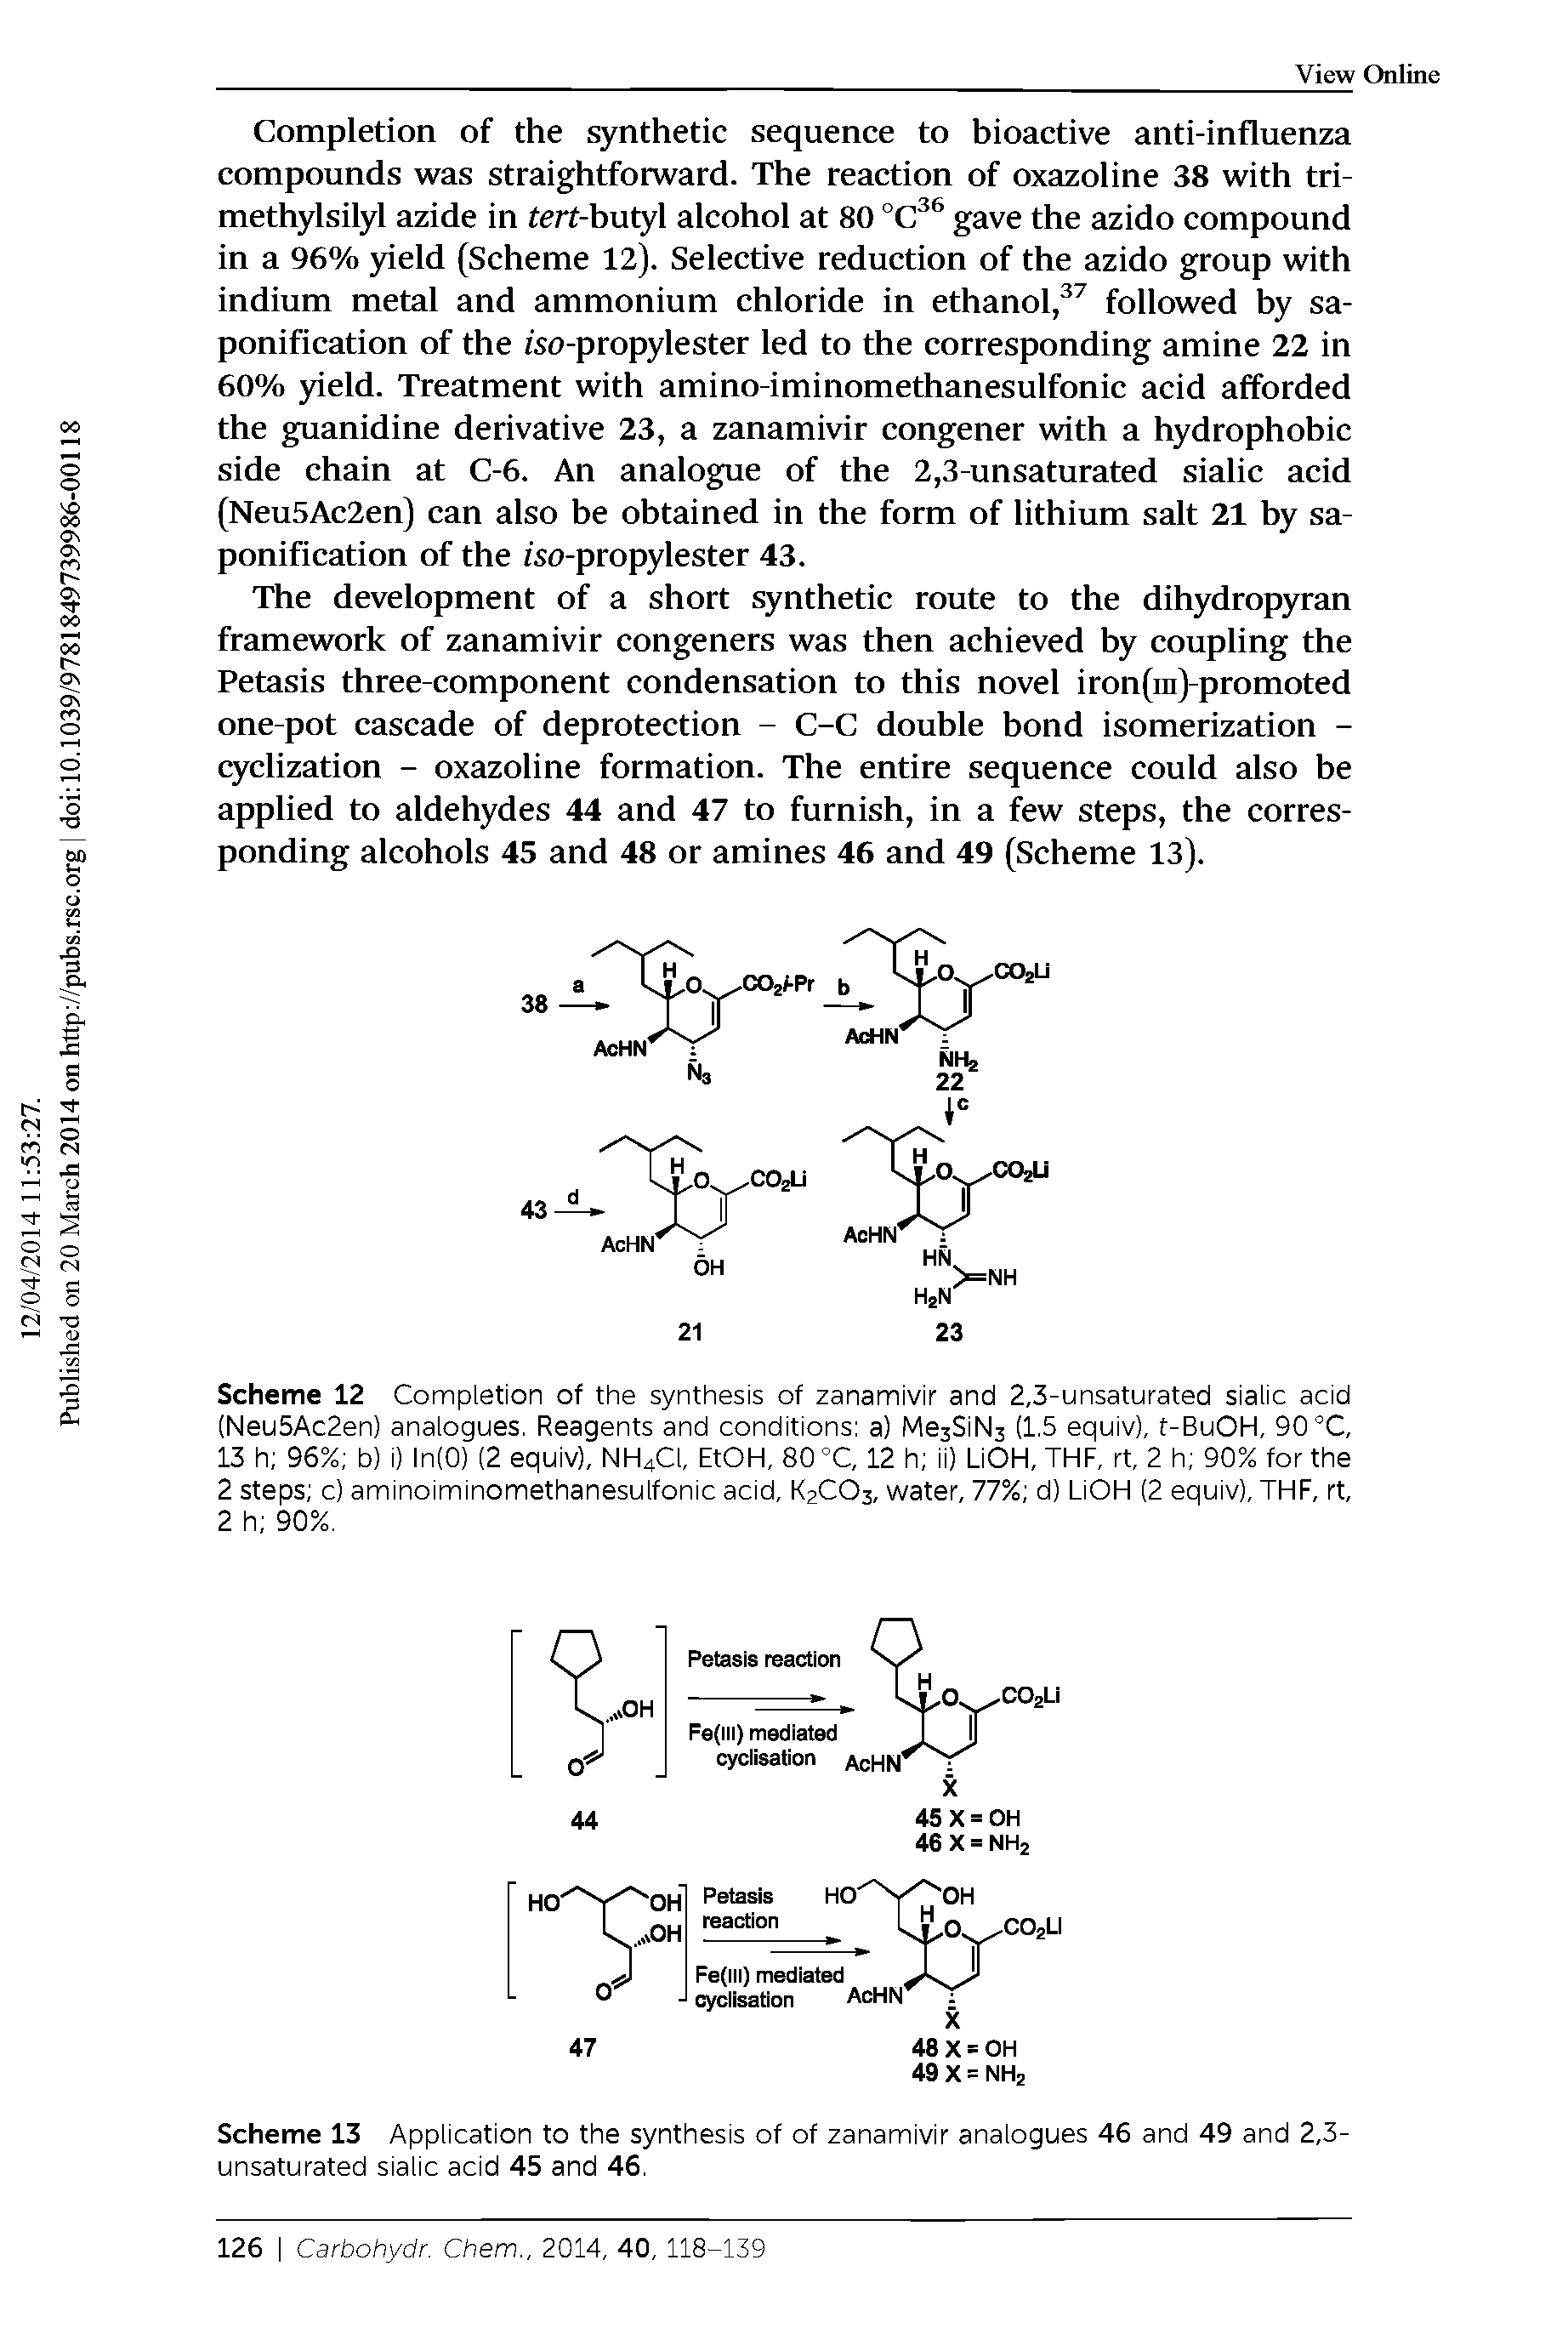 Scheme 13 Application to the synthesis of of zanamivir analogues 46 and 49 and 2,3-unsaturated sialic acid 45 and 46.